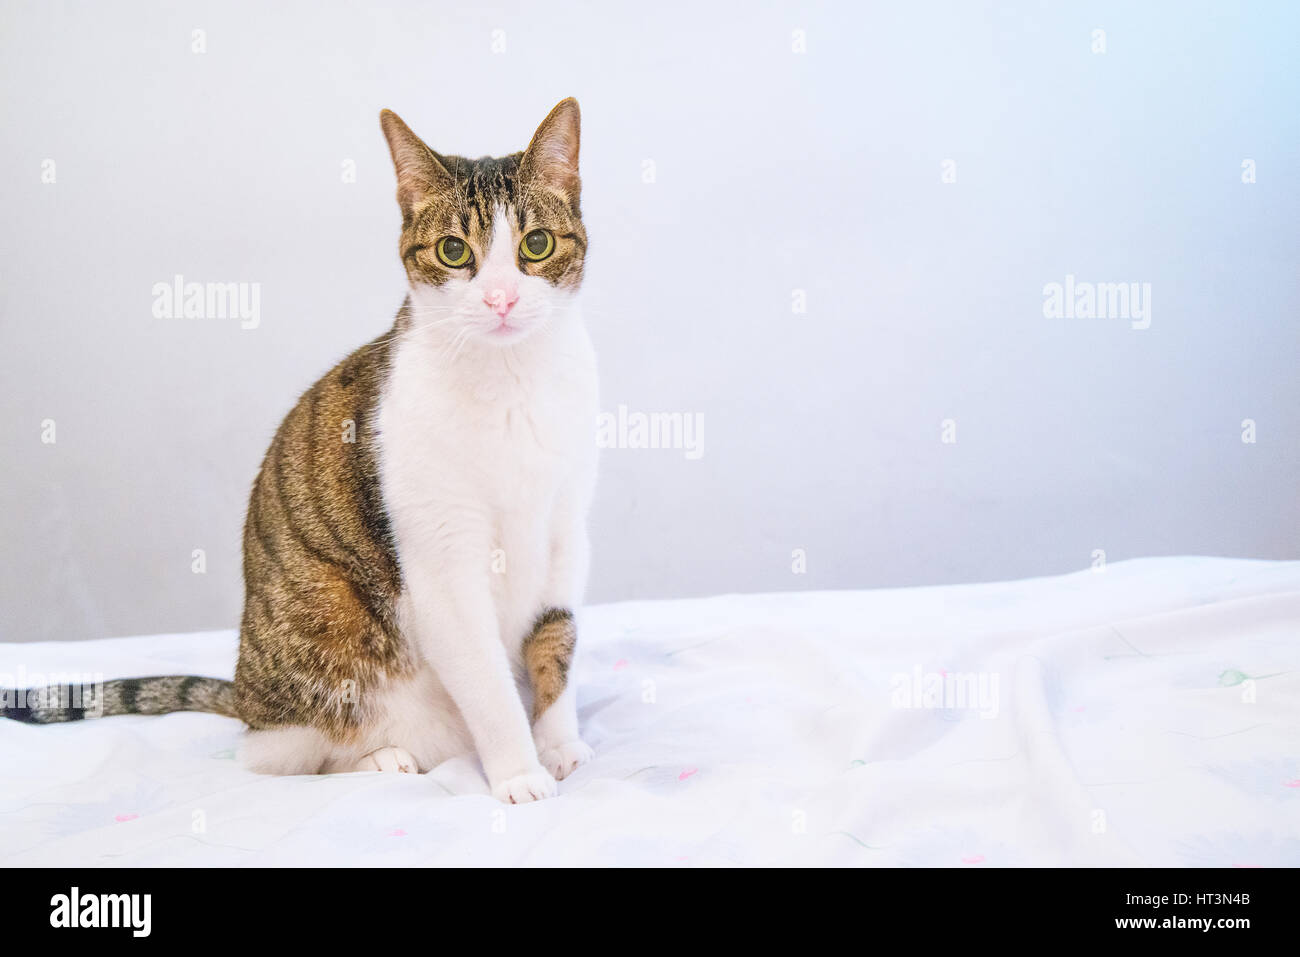 Tabby and white cat sitting, looking at the camera. Stock Photo